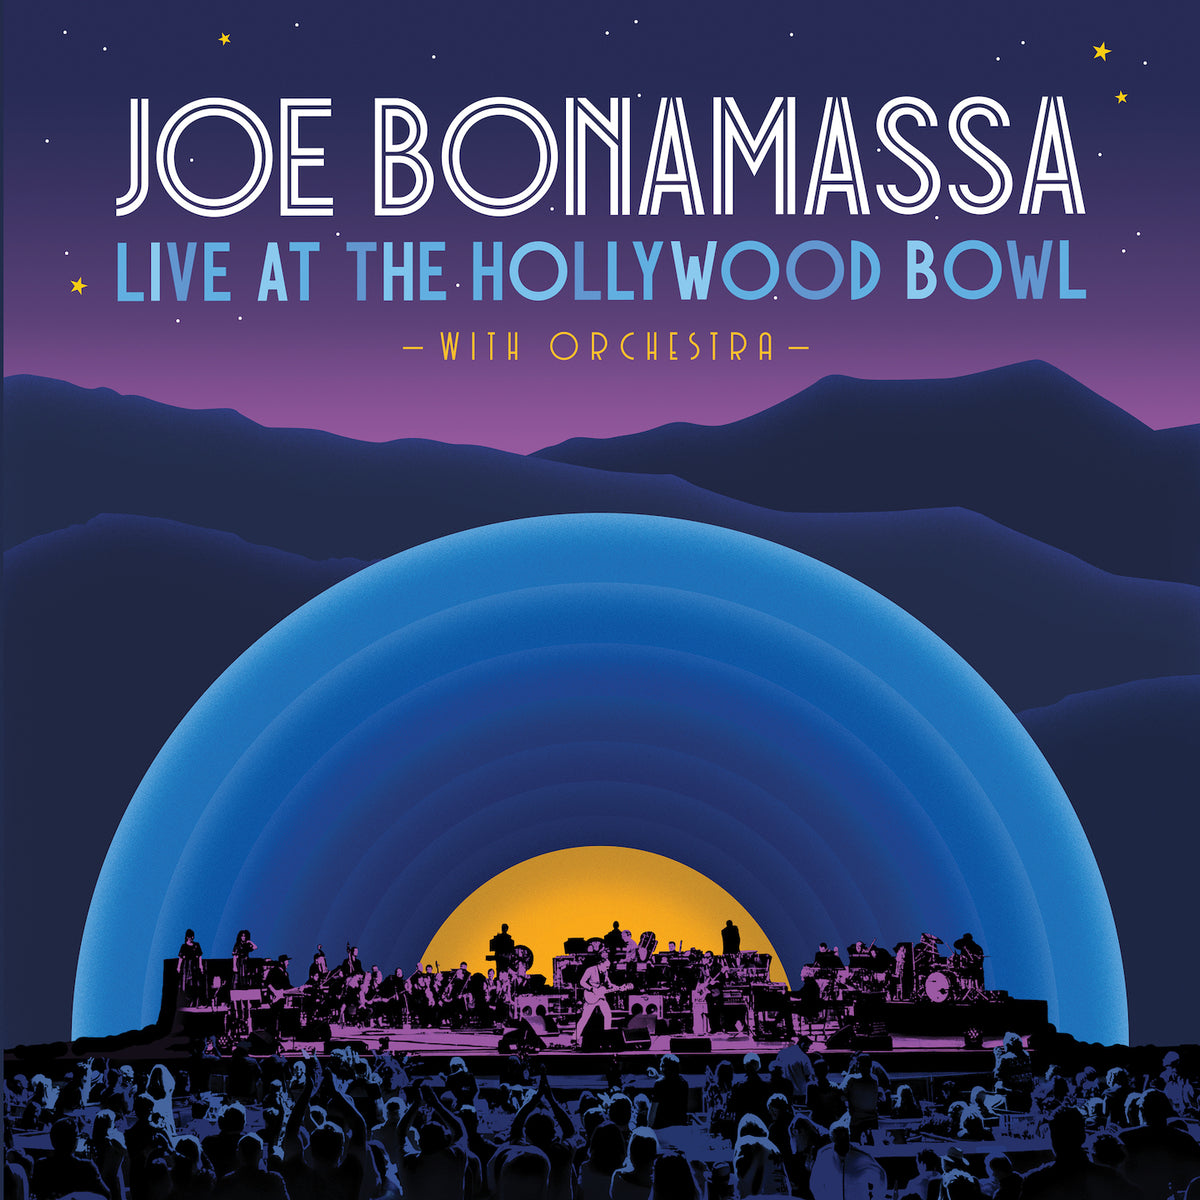 If Heartaches Were Nickels (Live at the Hollywood Bowl with Orchestra) - Joe Bonamassa - Single